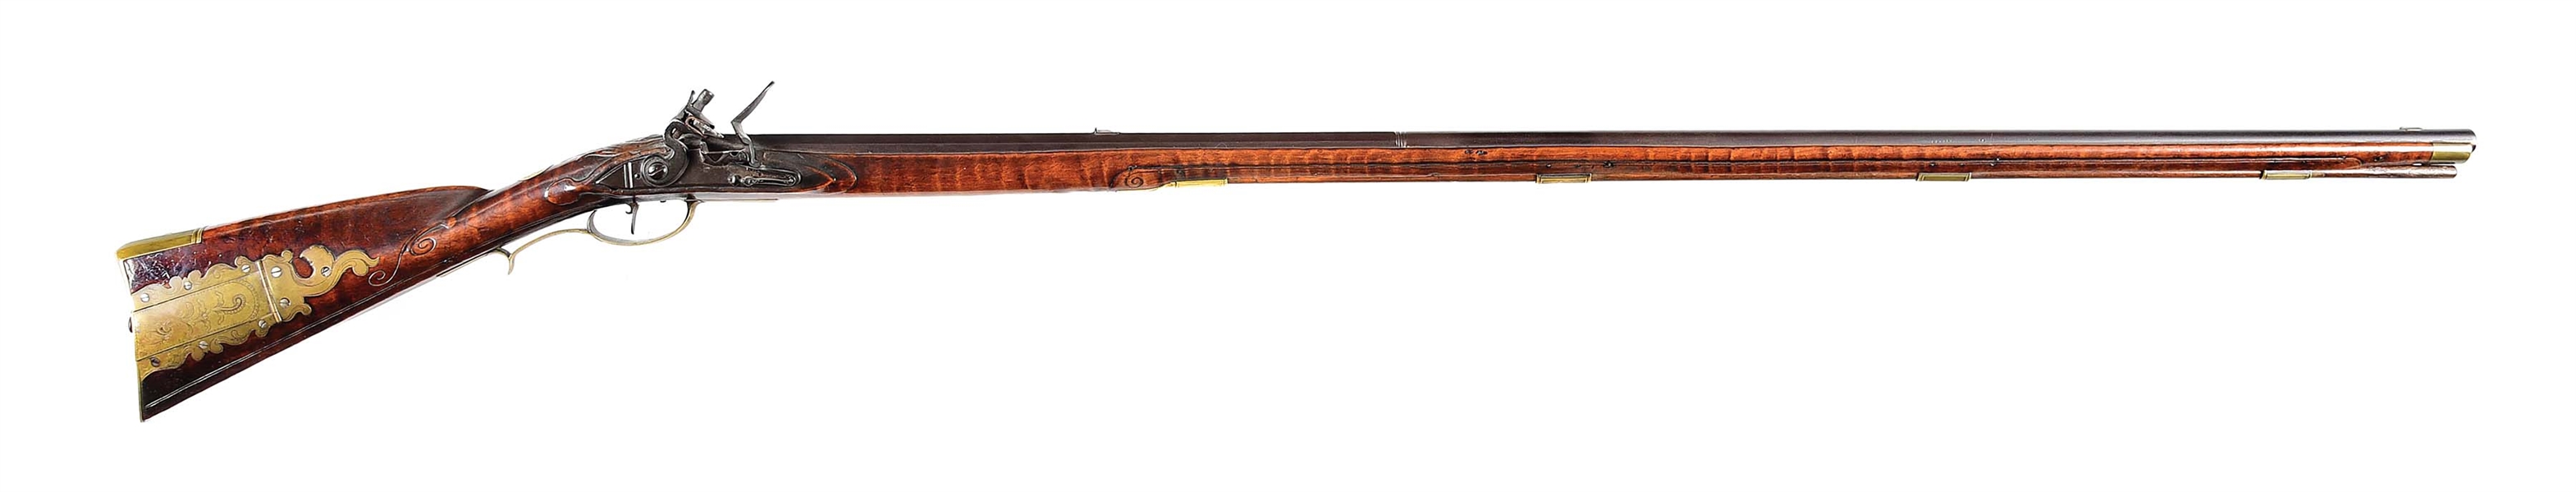 (A) EARLY CARVED FLINTLOCK RIFLE ATTRIBUTED TO JOHN BONEWITZ.